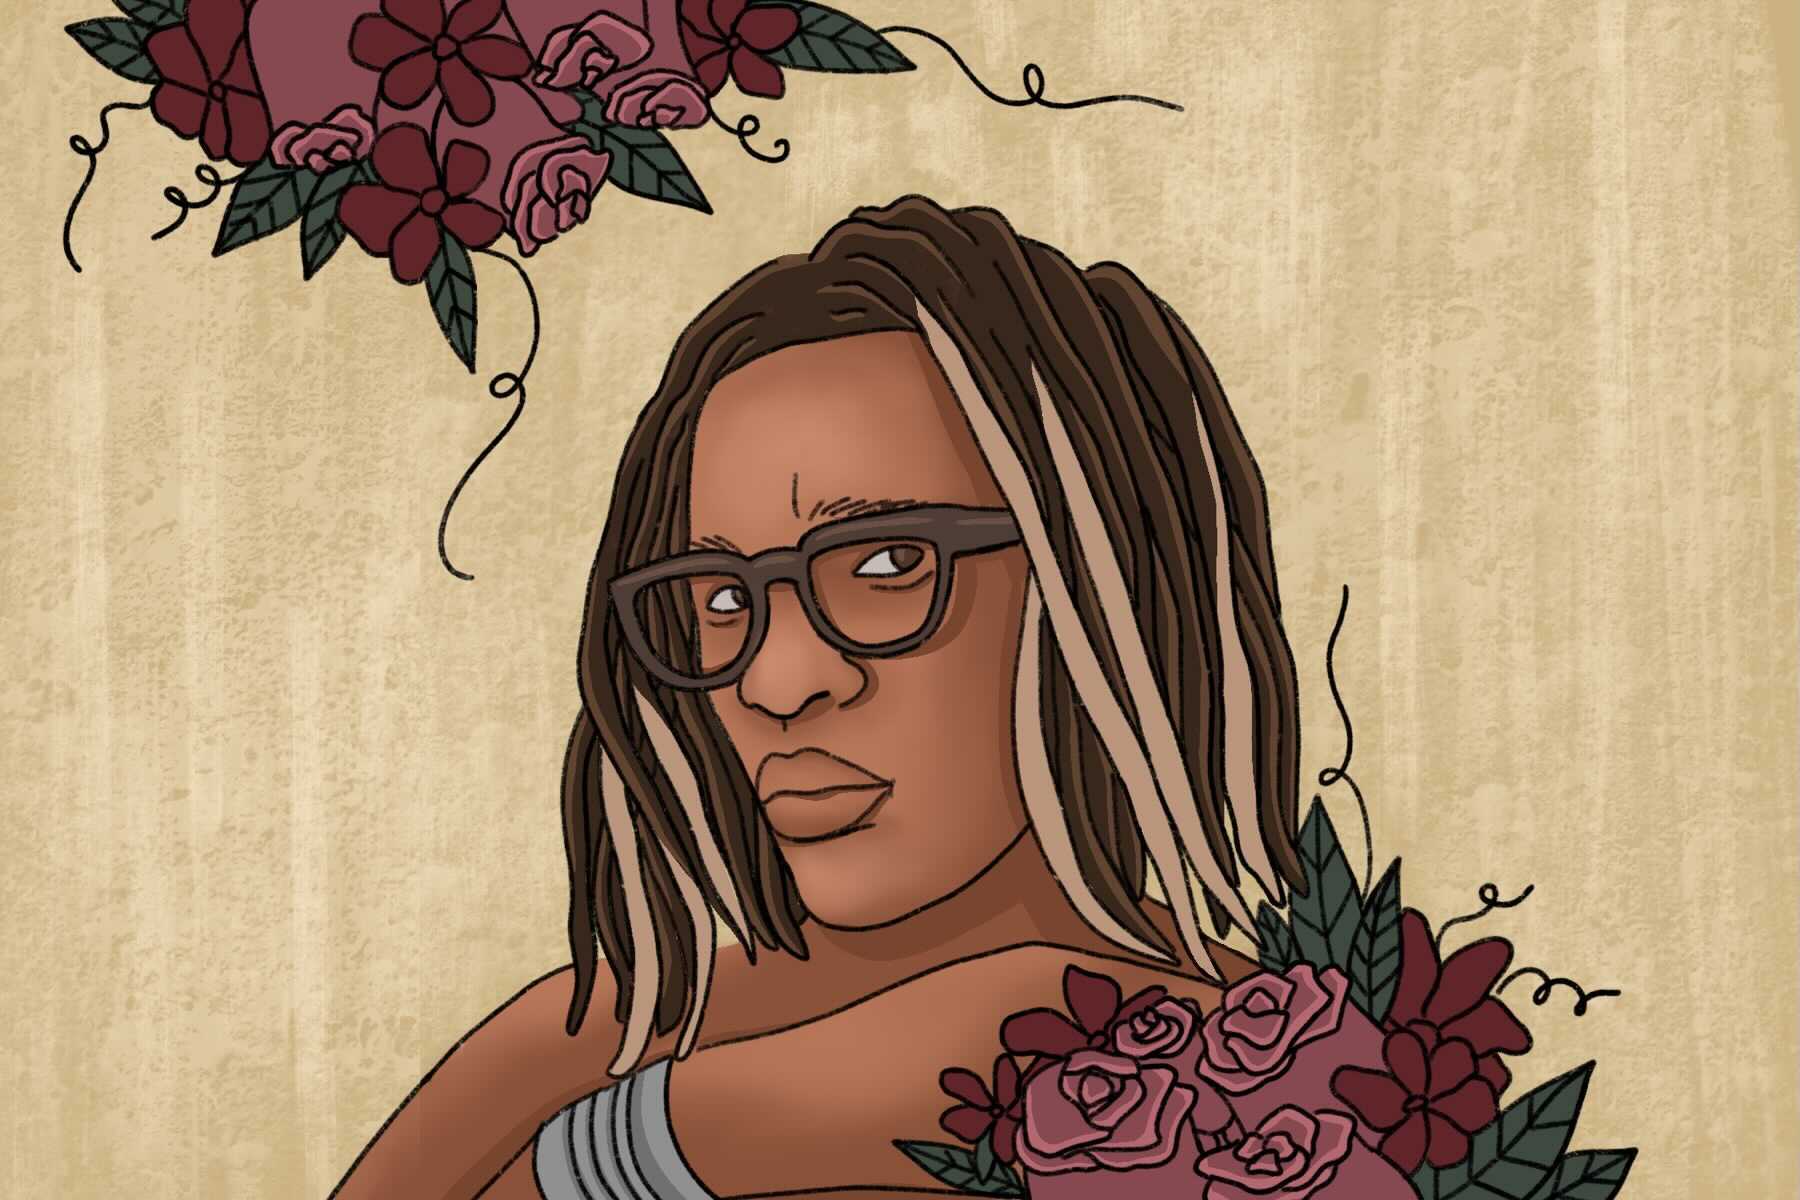 Illustration of Young Thug. (Illustration by Katelyn McManis, Columbia College Chicago)